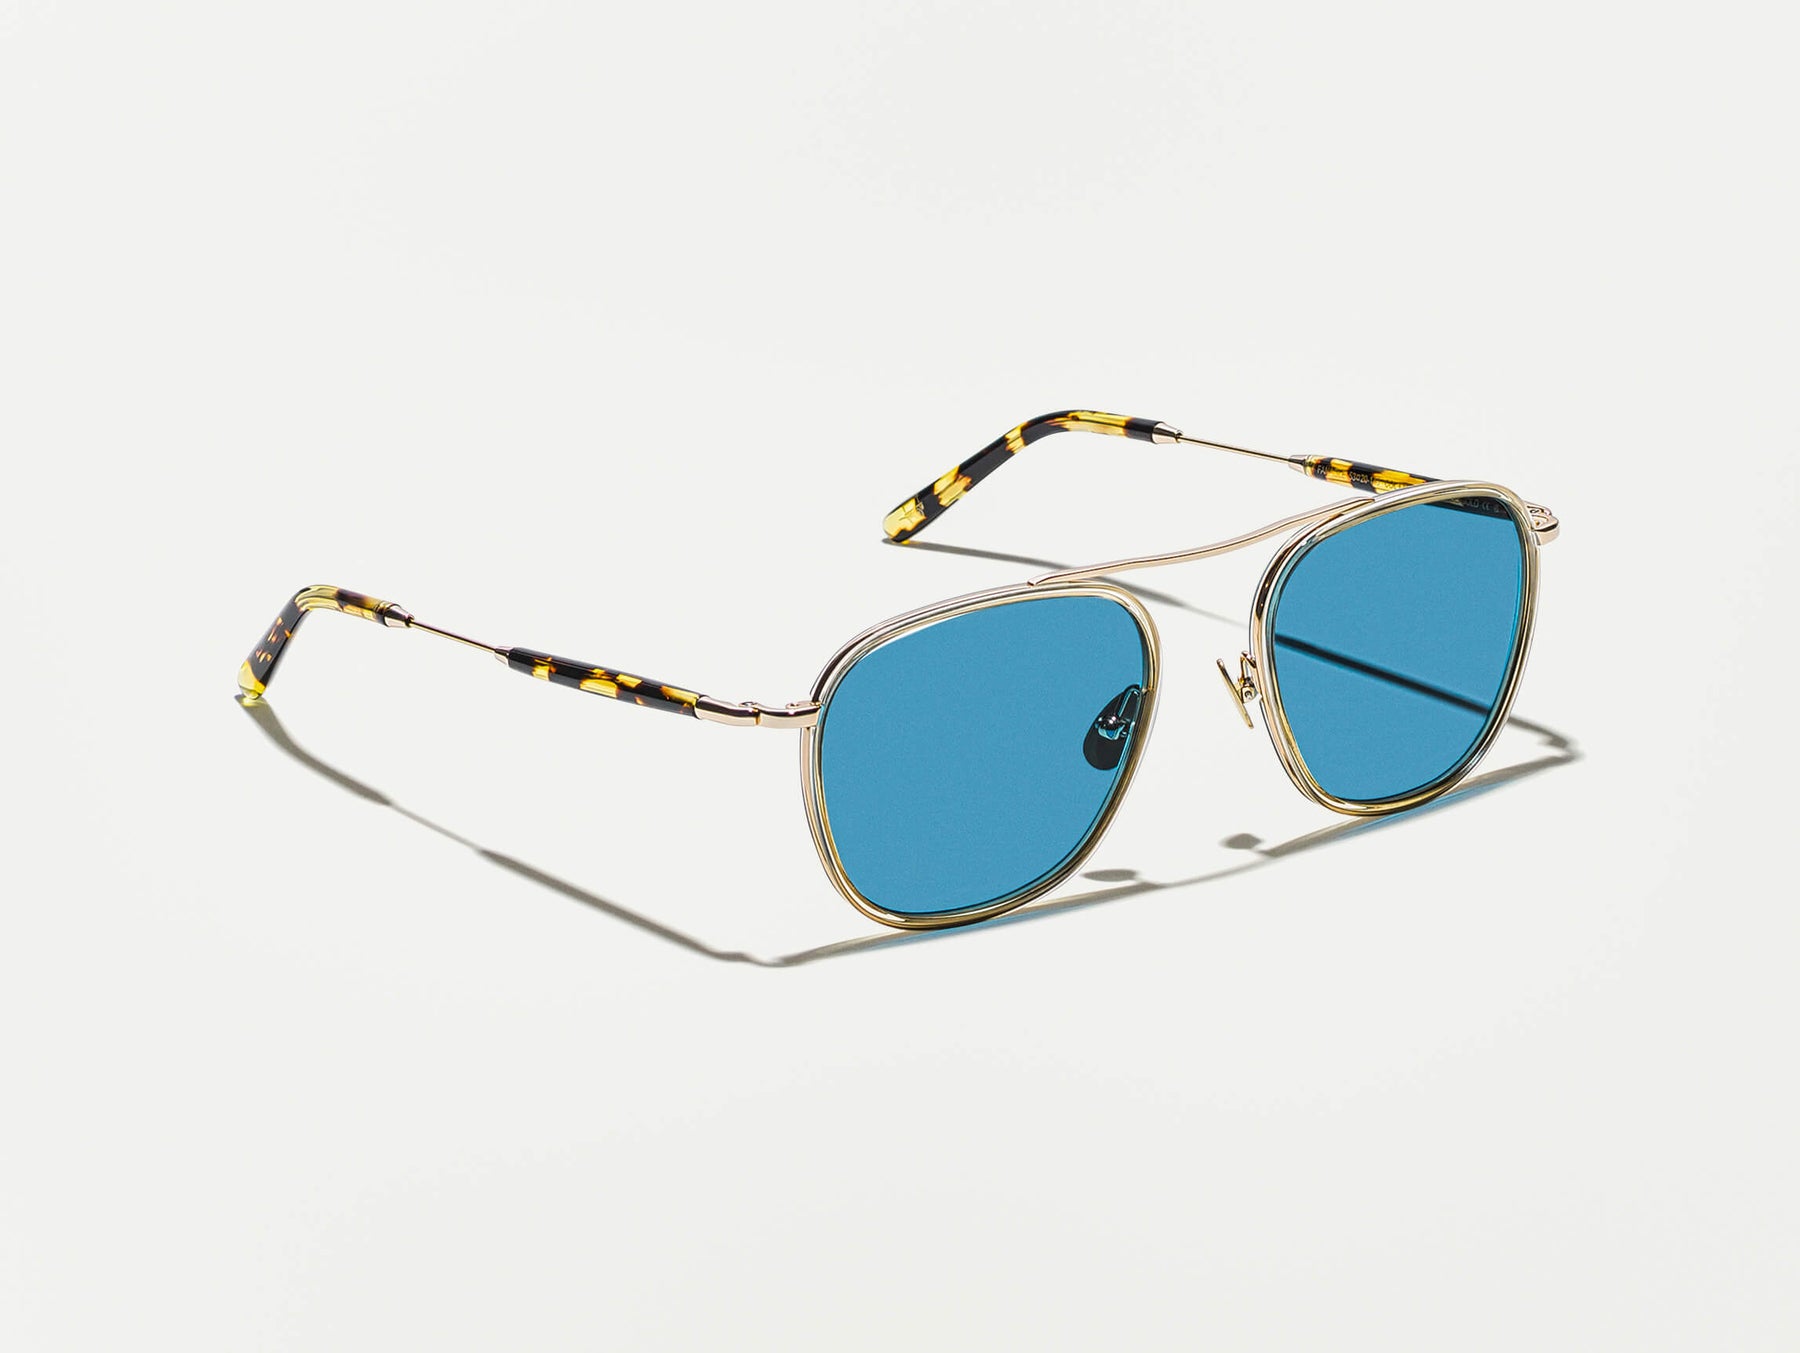 The FANAGLE SUN in Citron/Tortoise with Celebrity Blue Tinted Lenses